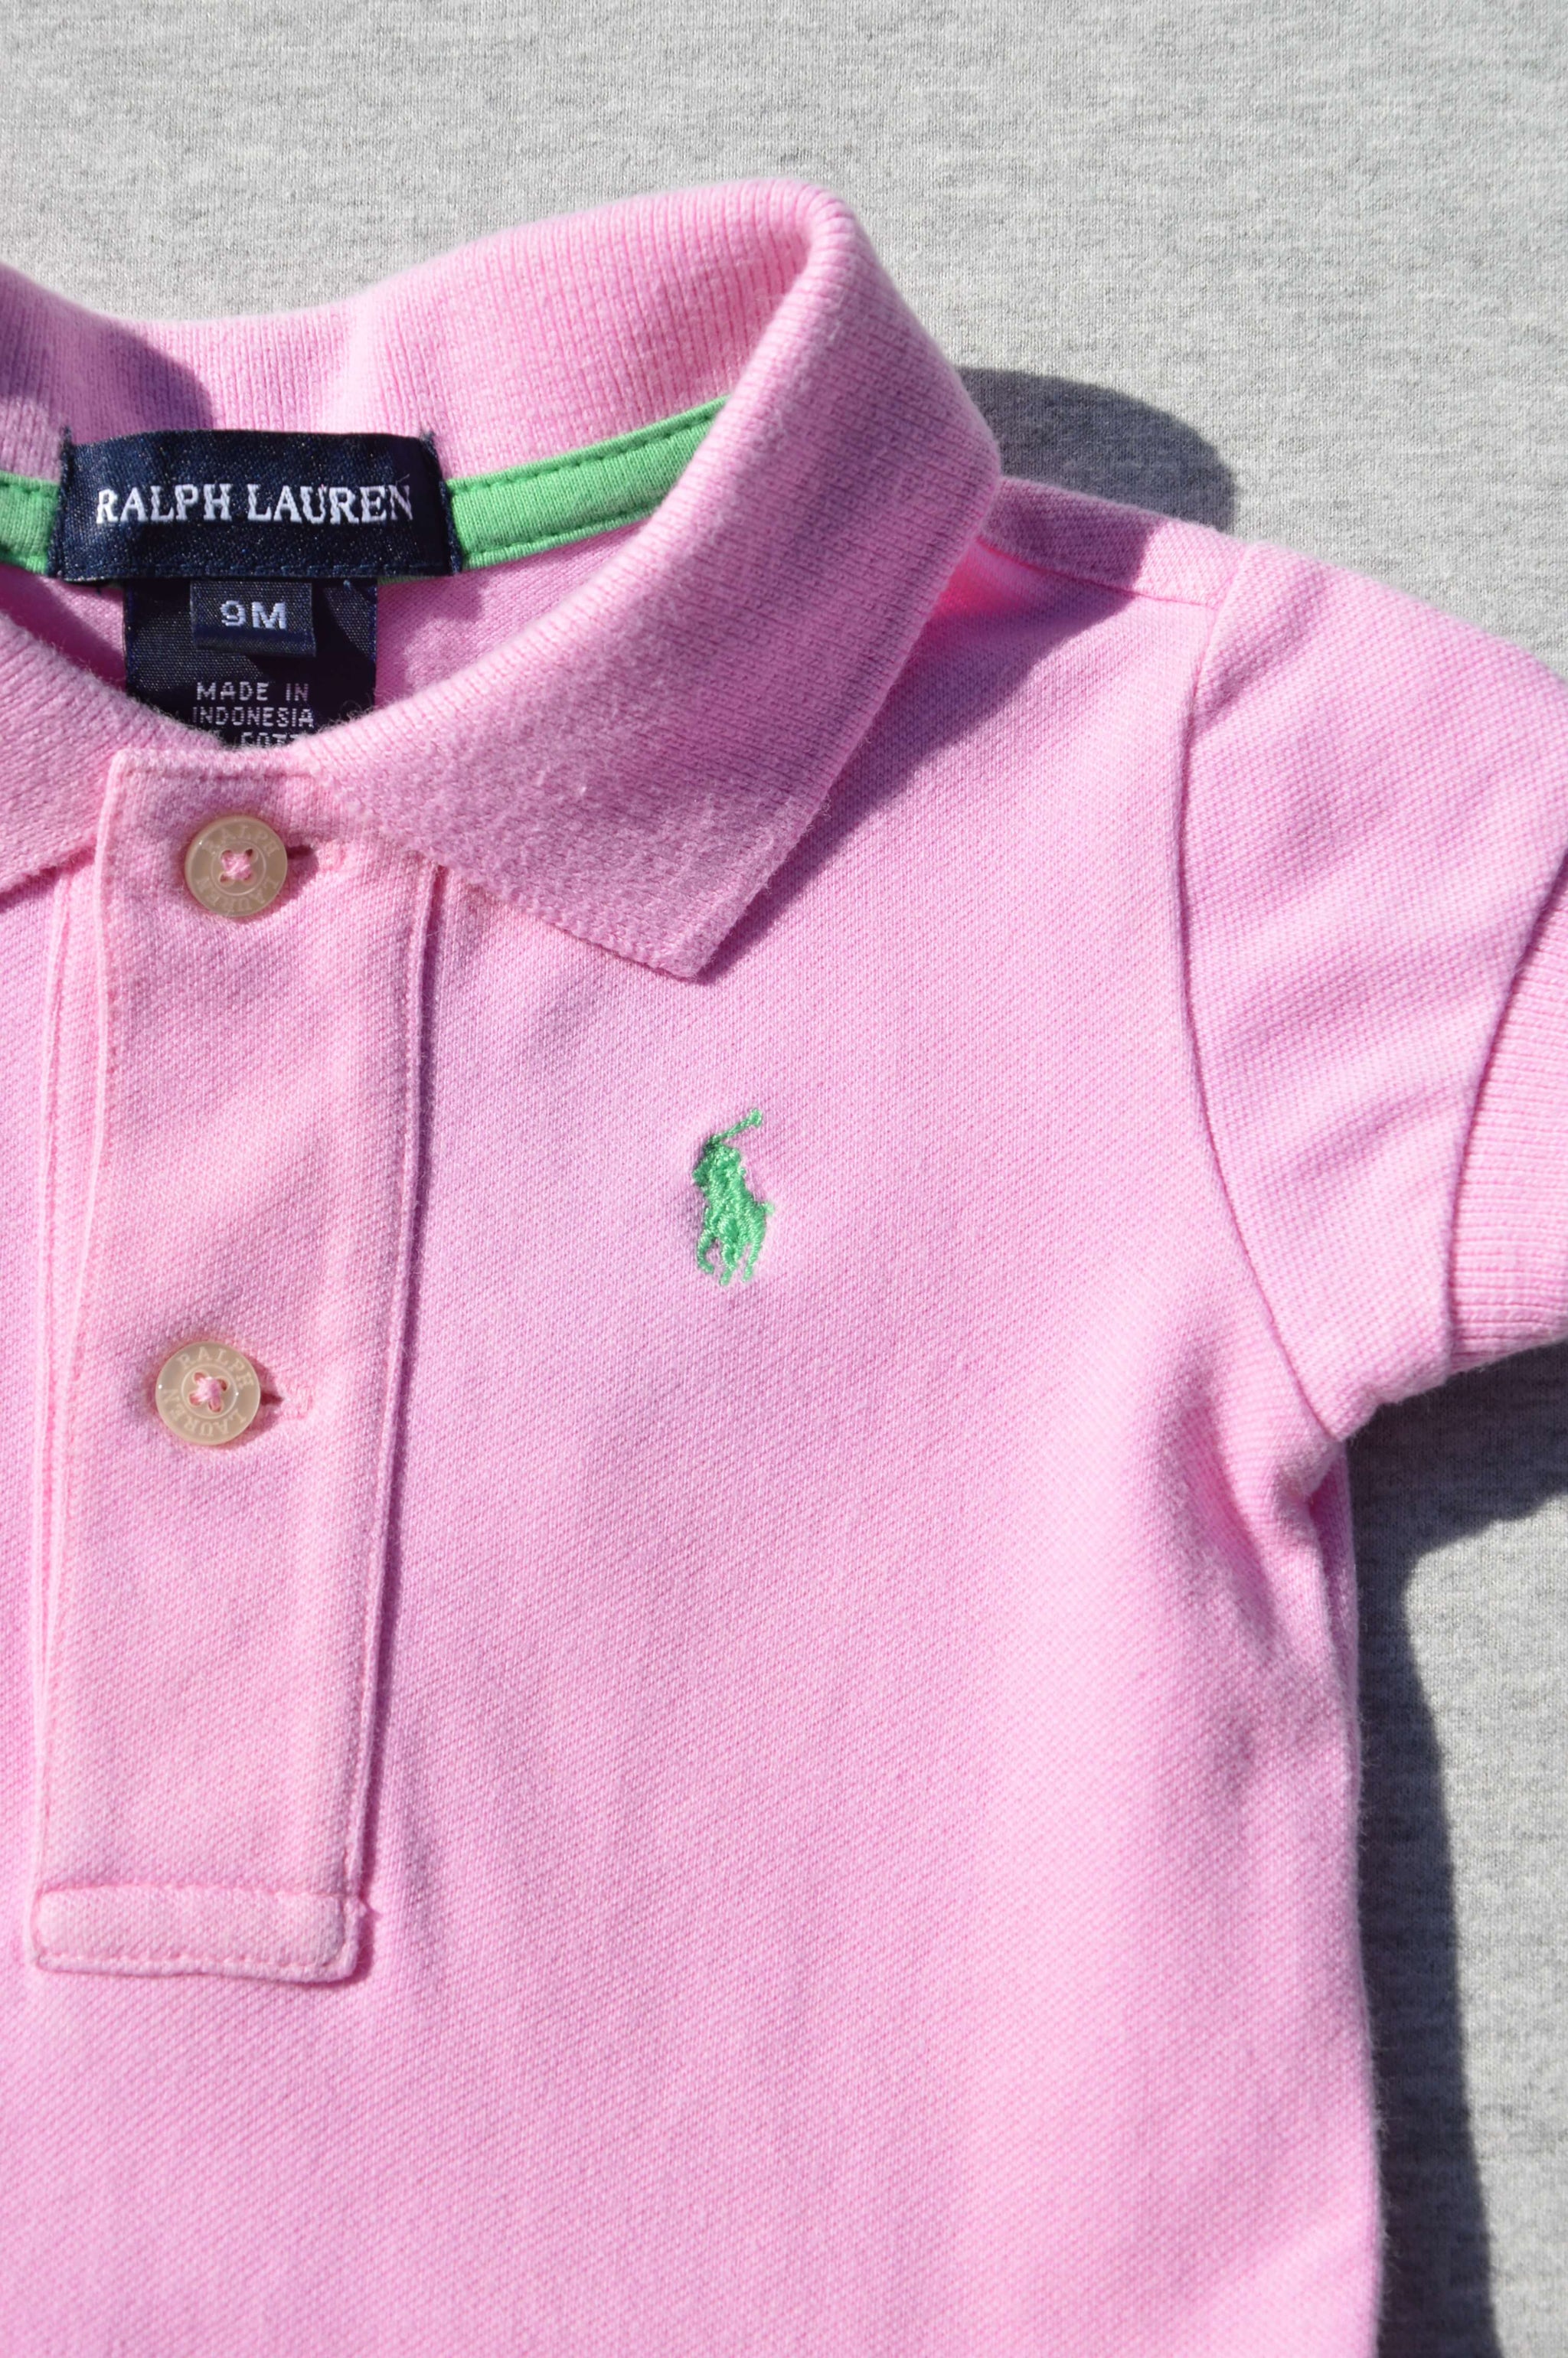 Ralph Lauren - nearly new - pink polo dress, size 9m - Charlie & Flo's